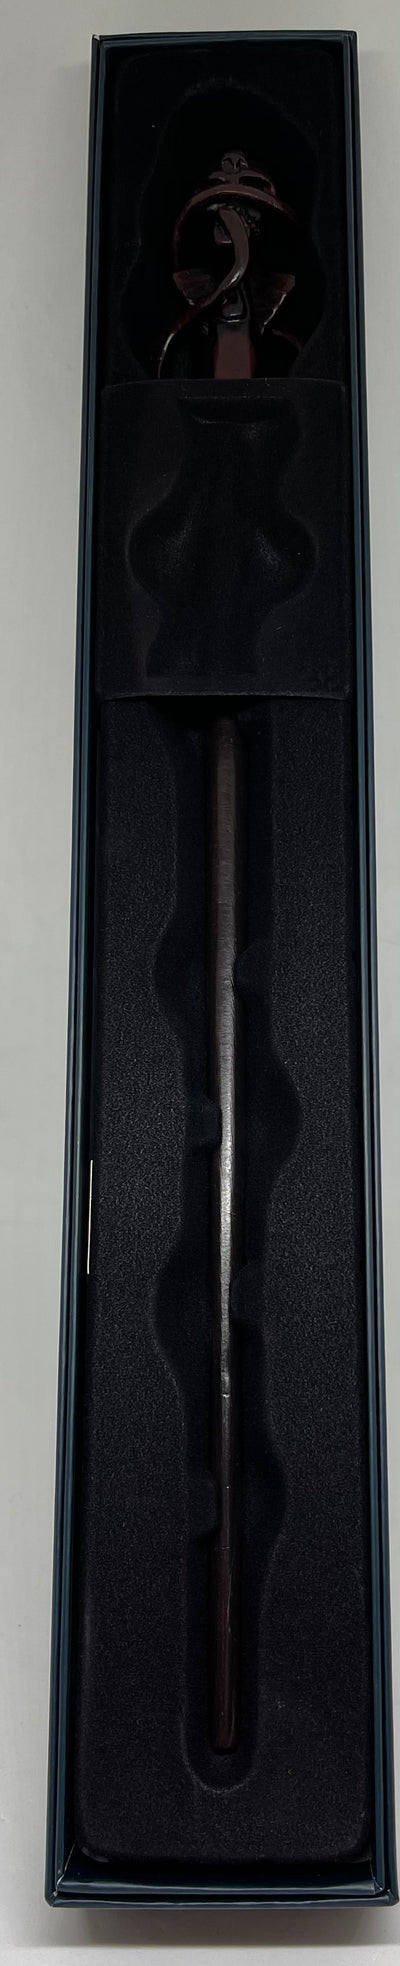 Universal Studios Death Eater Swirl Wand From Harry Potter New with Box